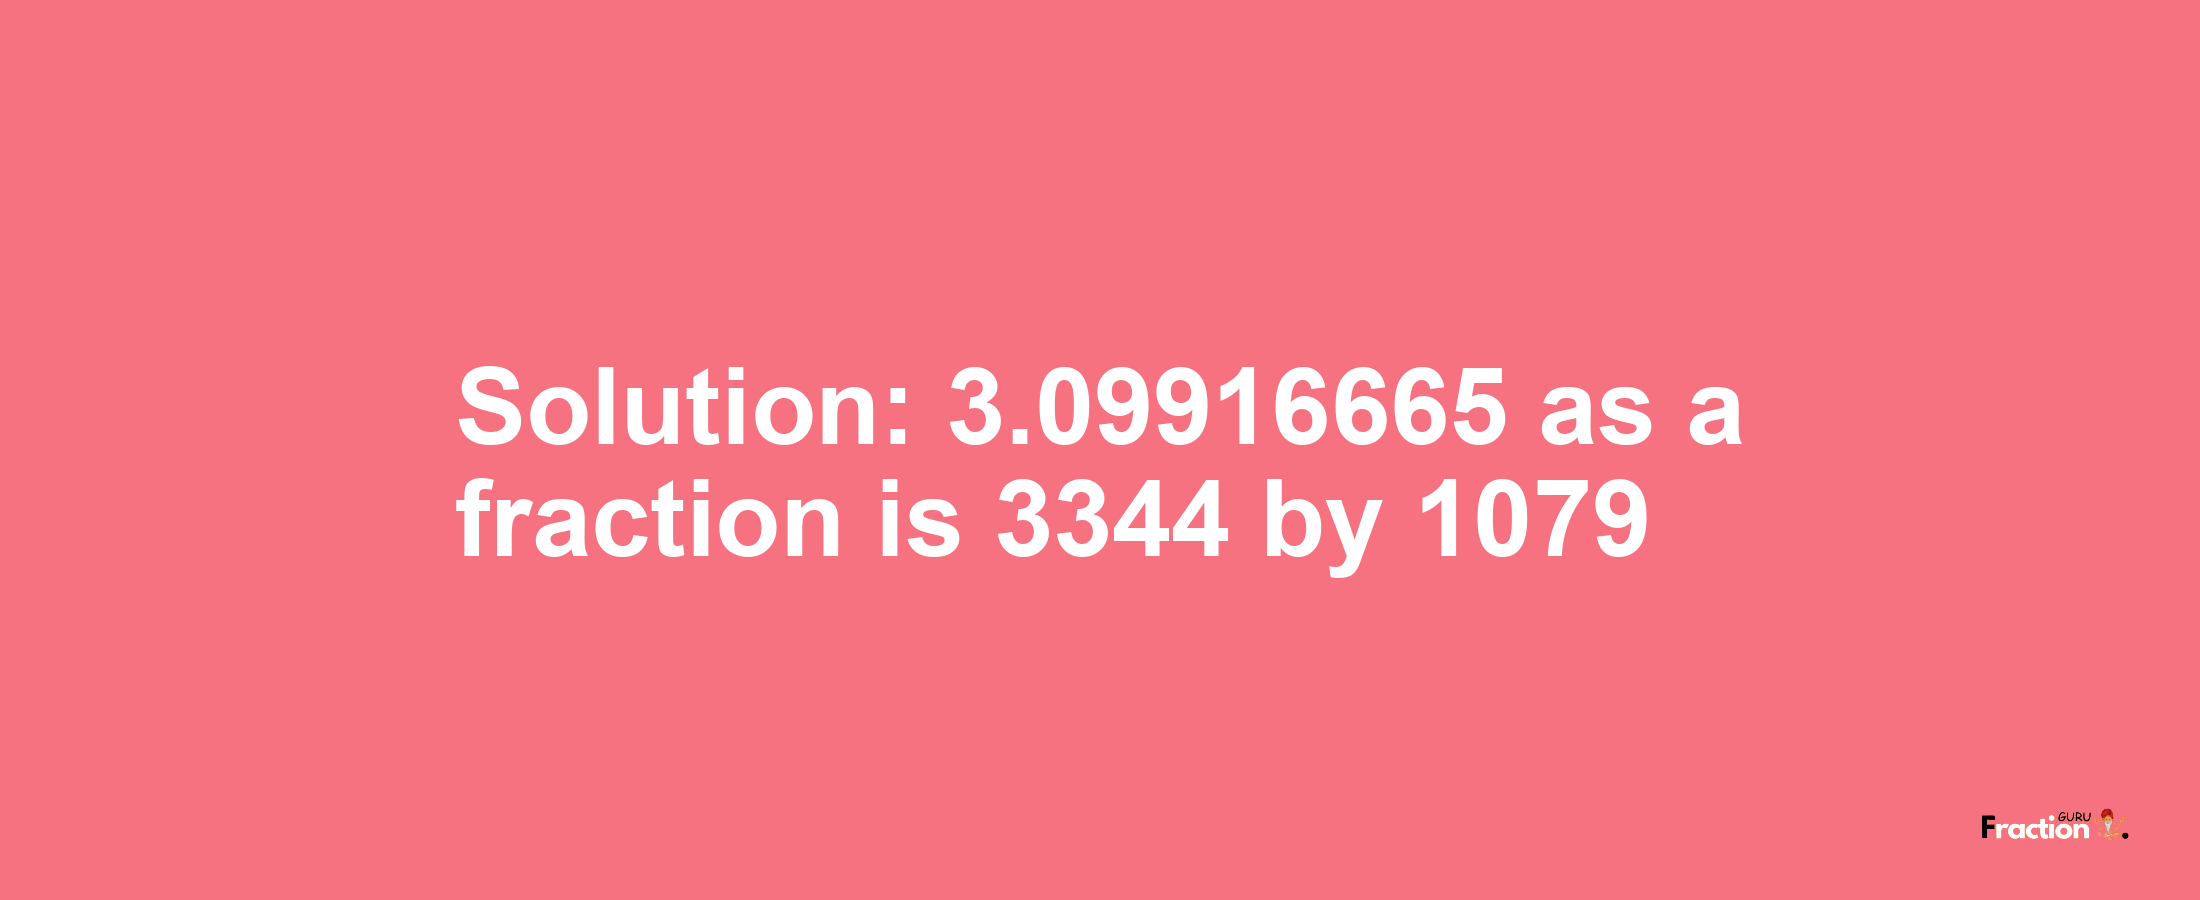 Solution:3.09916665 as a fraction is 3344/1079